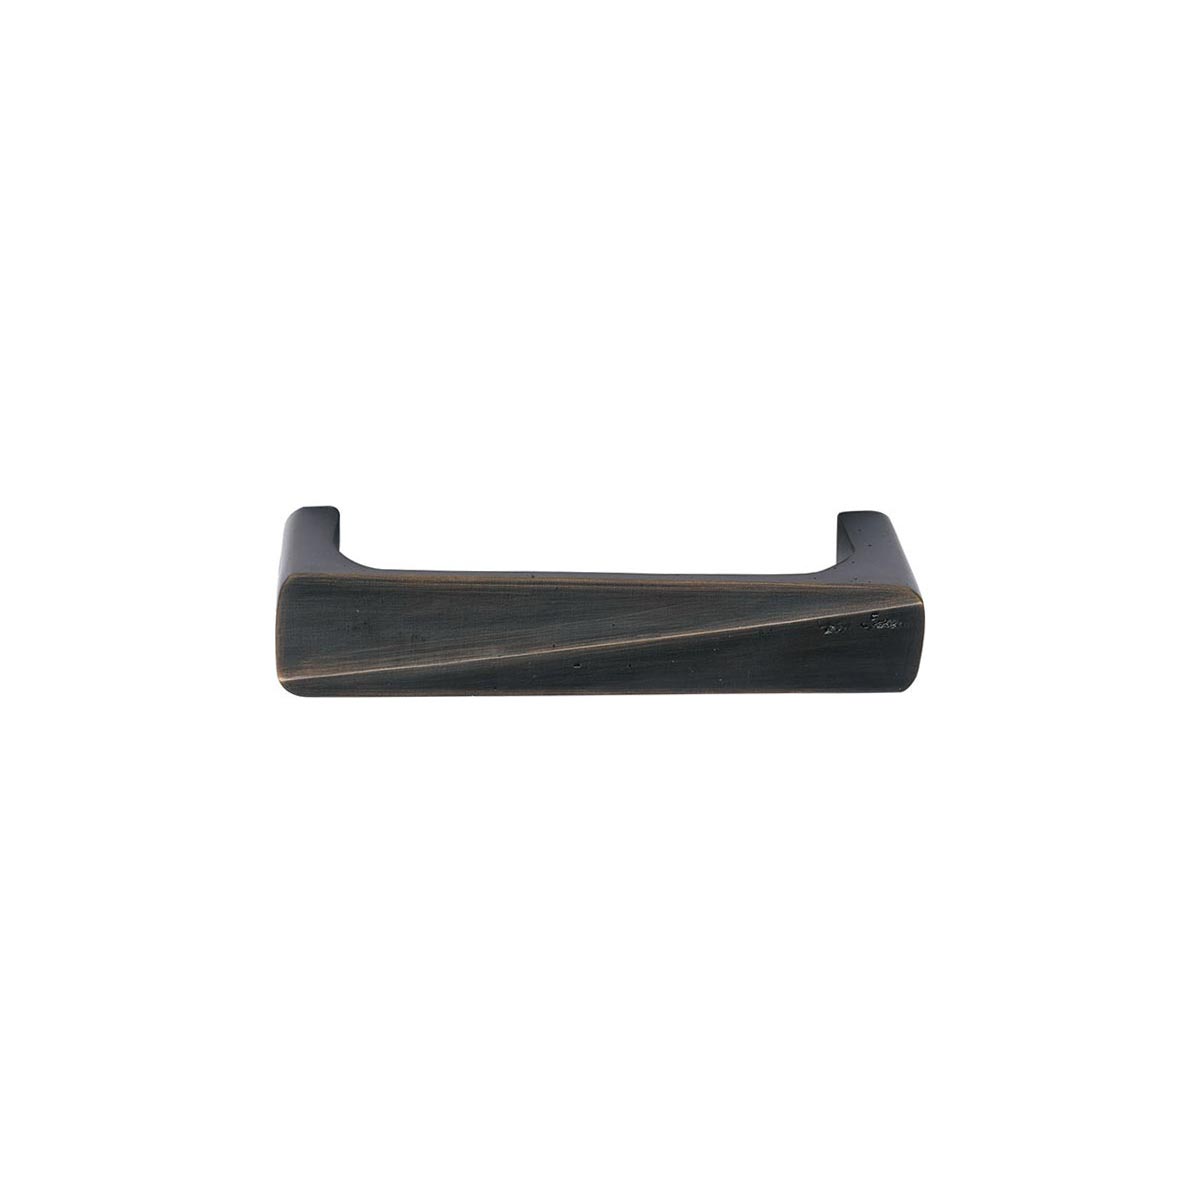 Solid Bronze Milan 4 inch Thick Cabinet Pull 